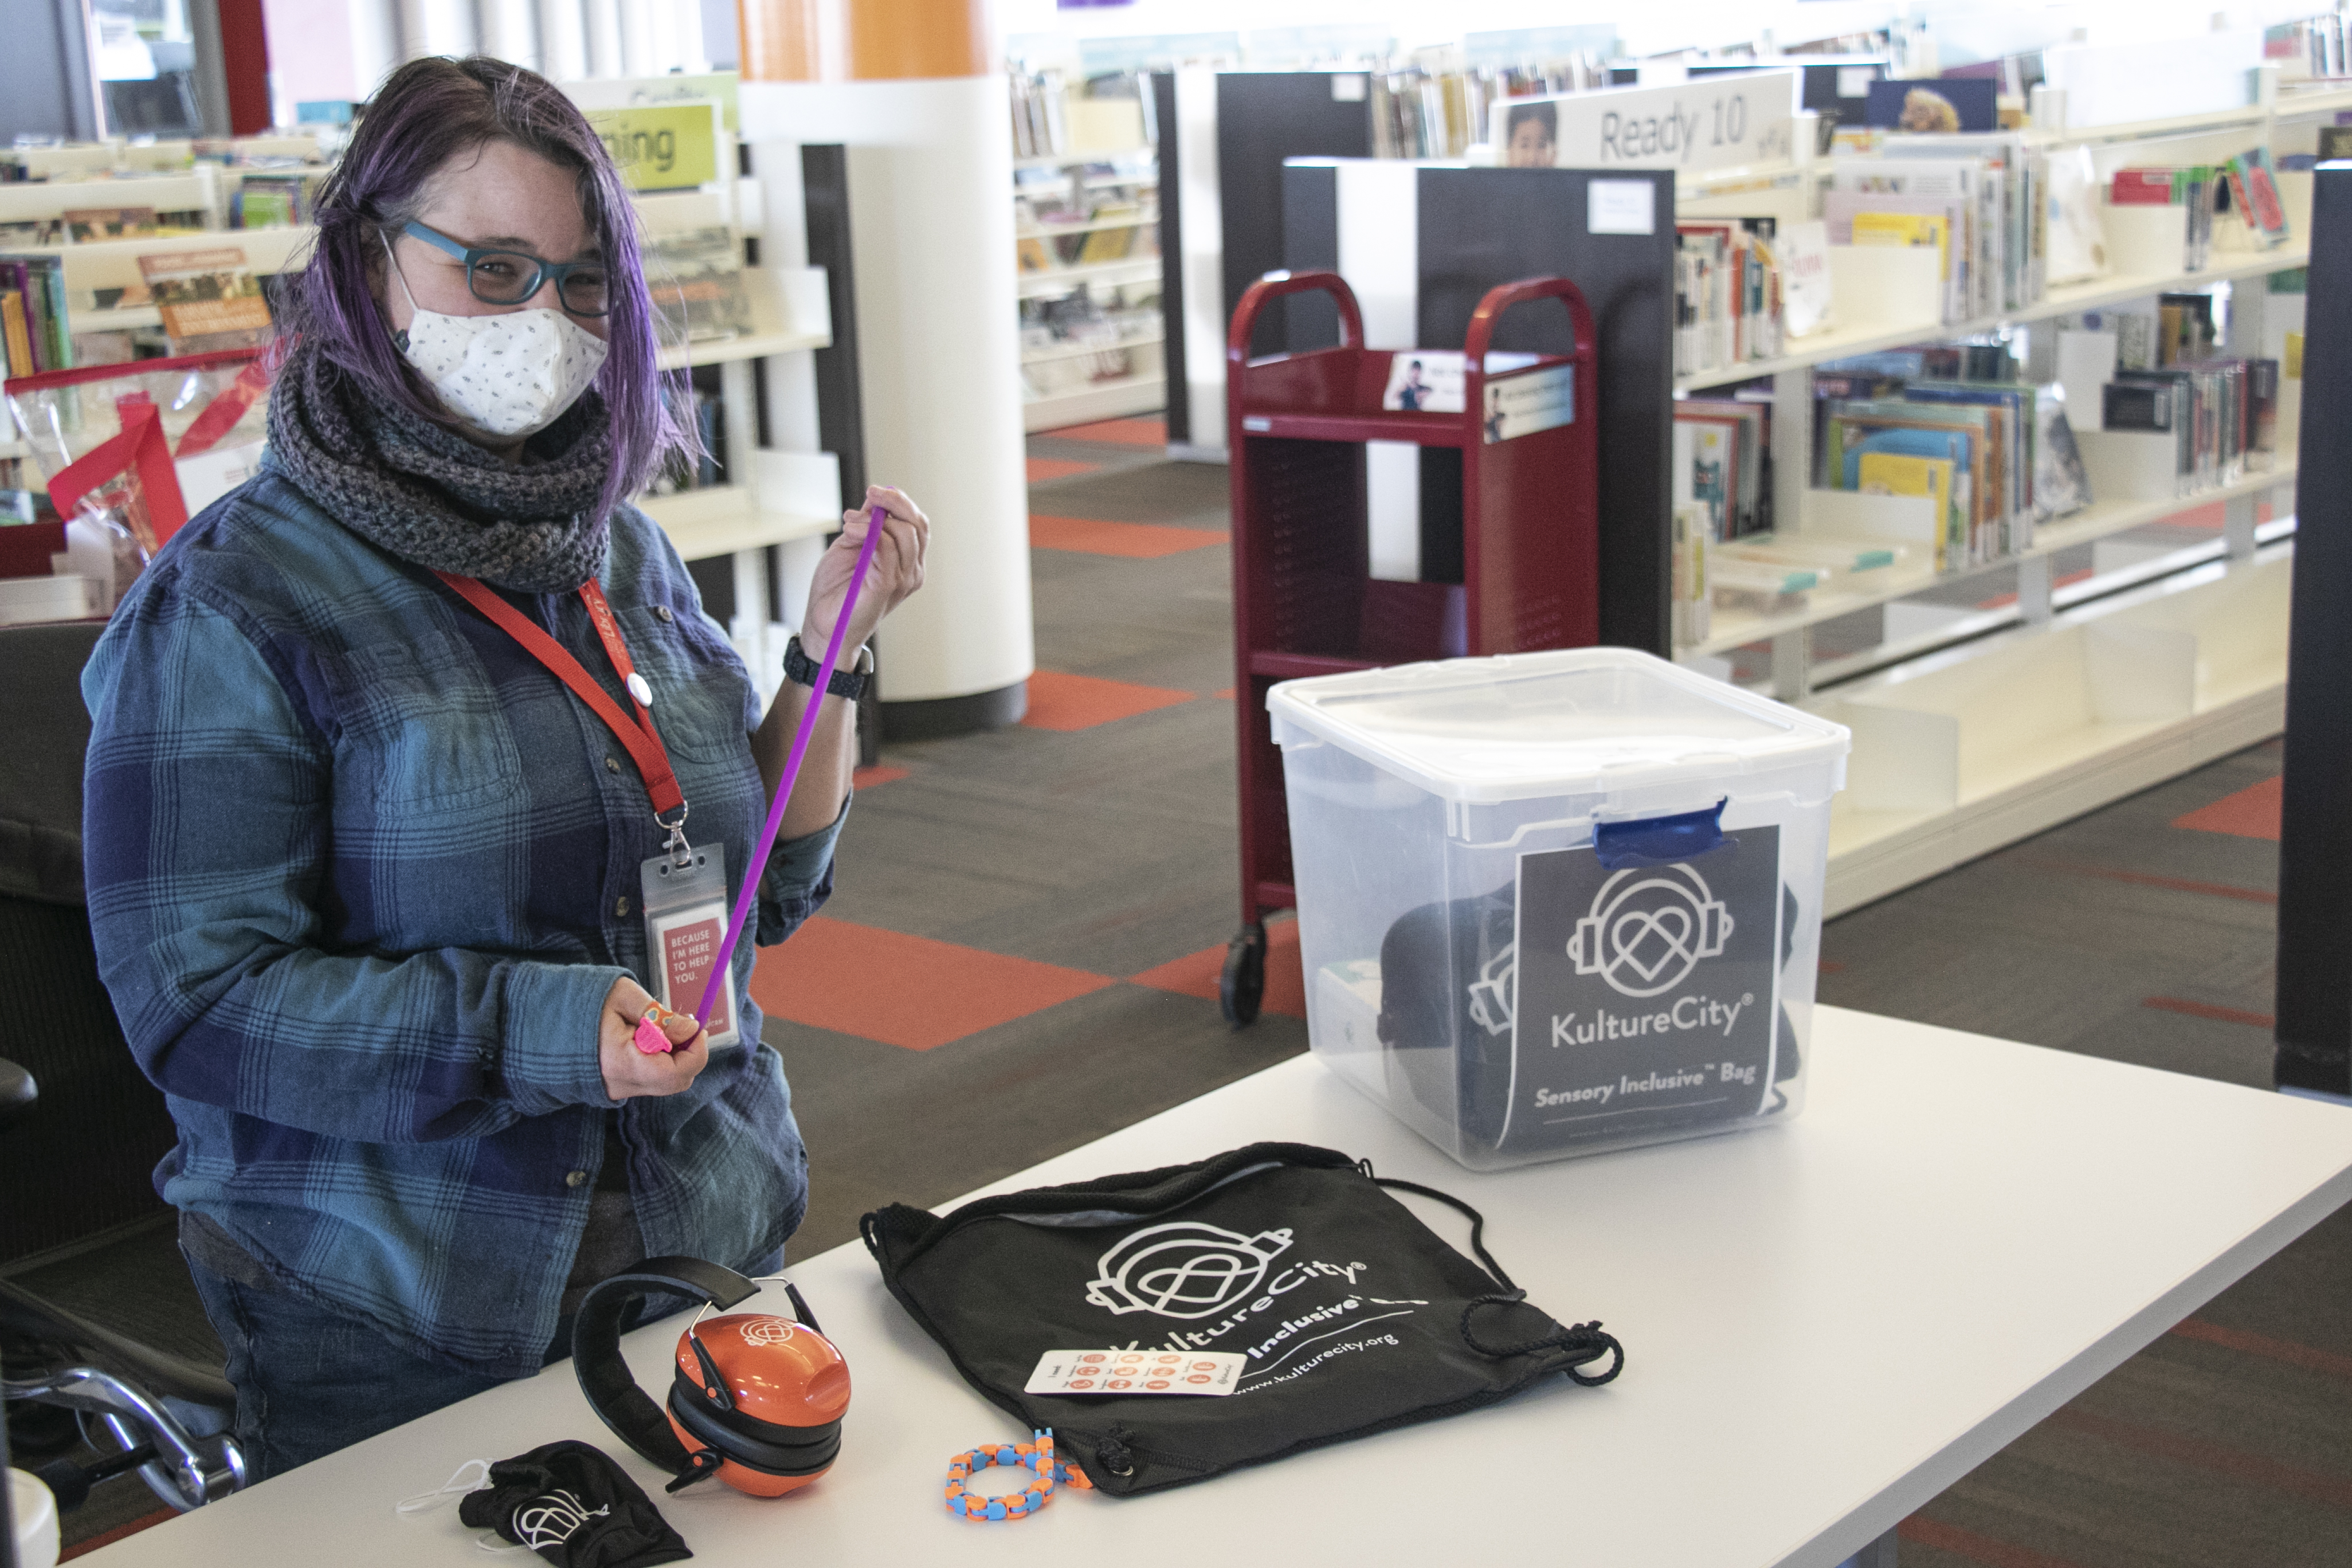 library staff member holding up the contents of the sensory kits, including headphones, lanyard, and more.